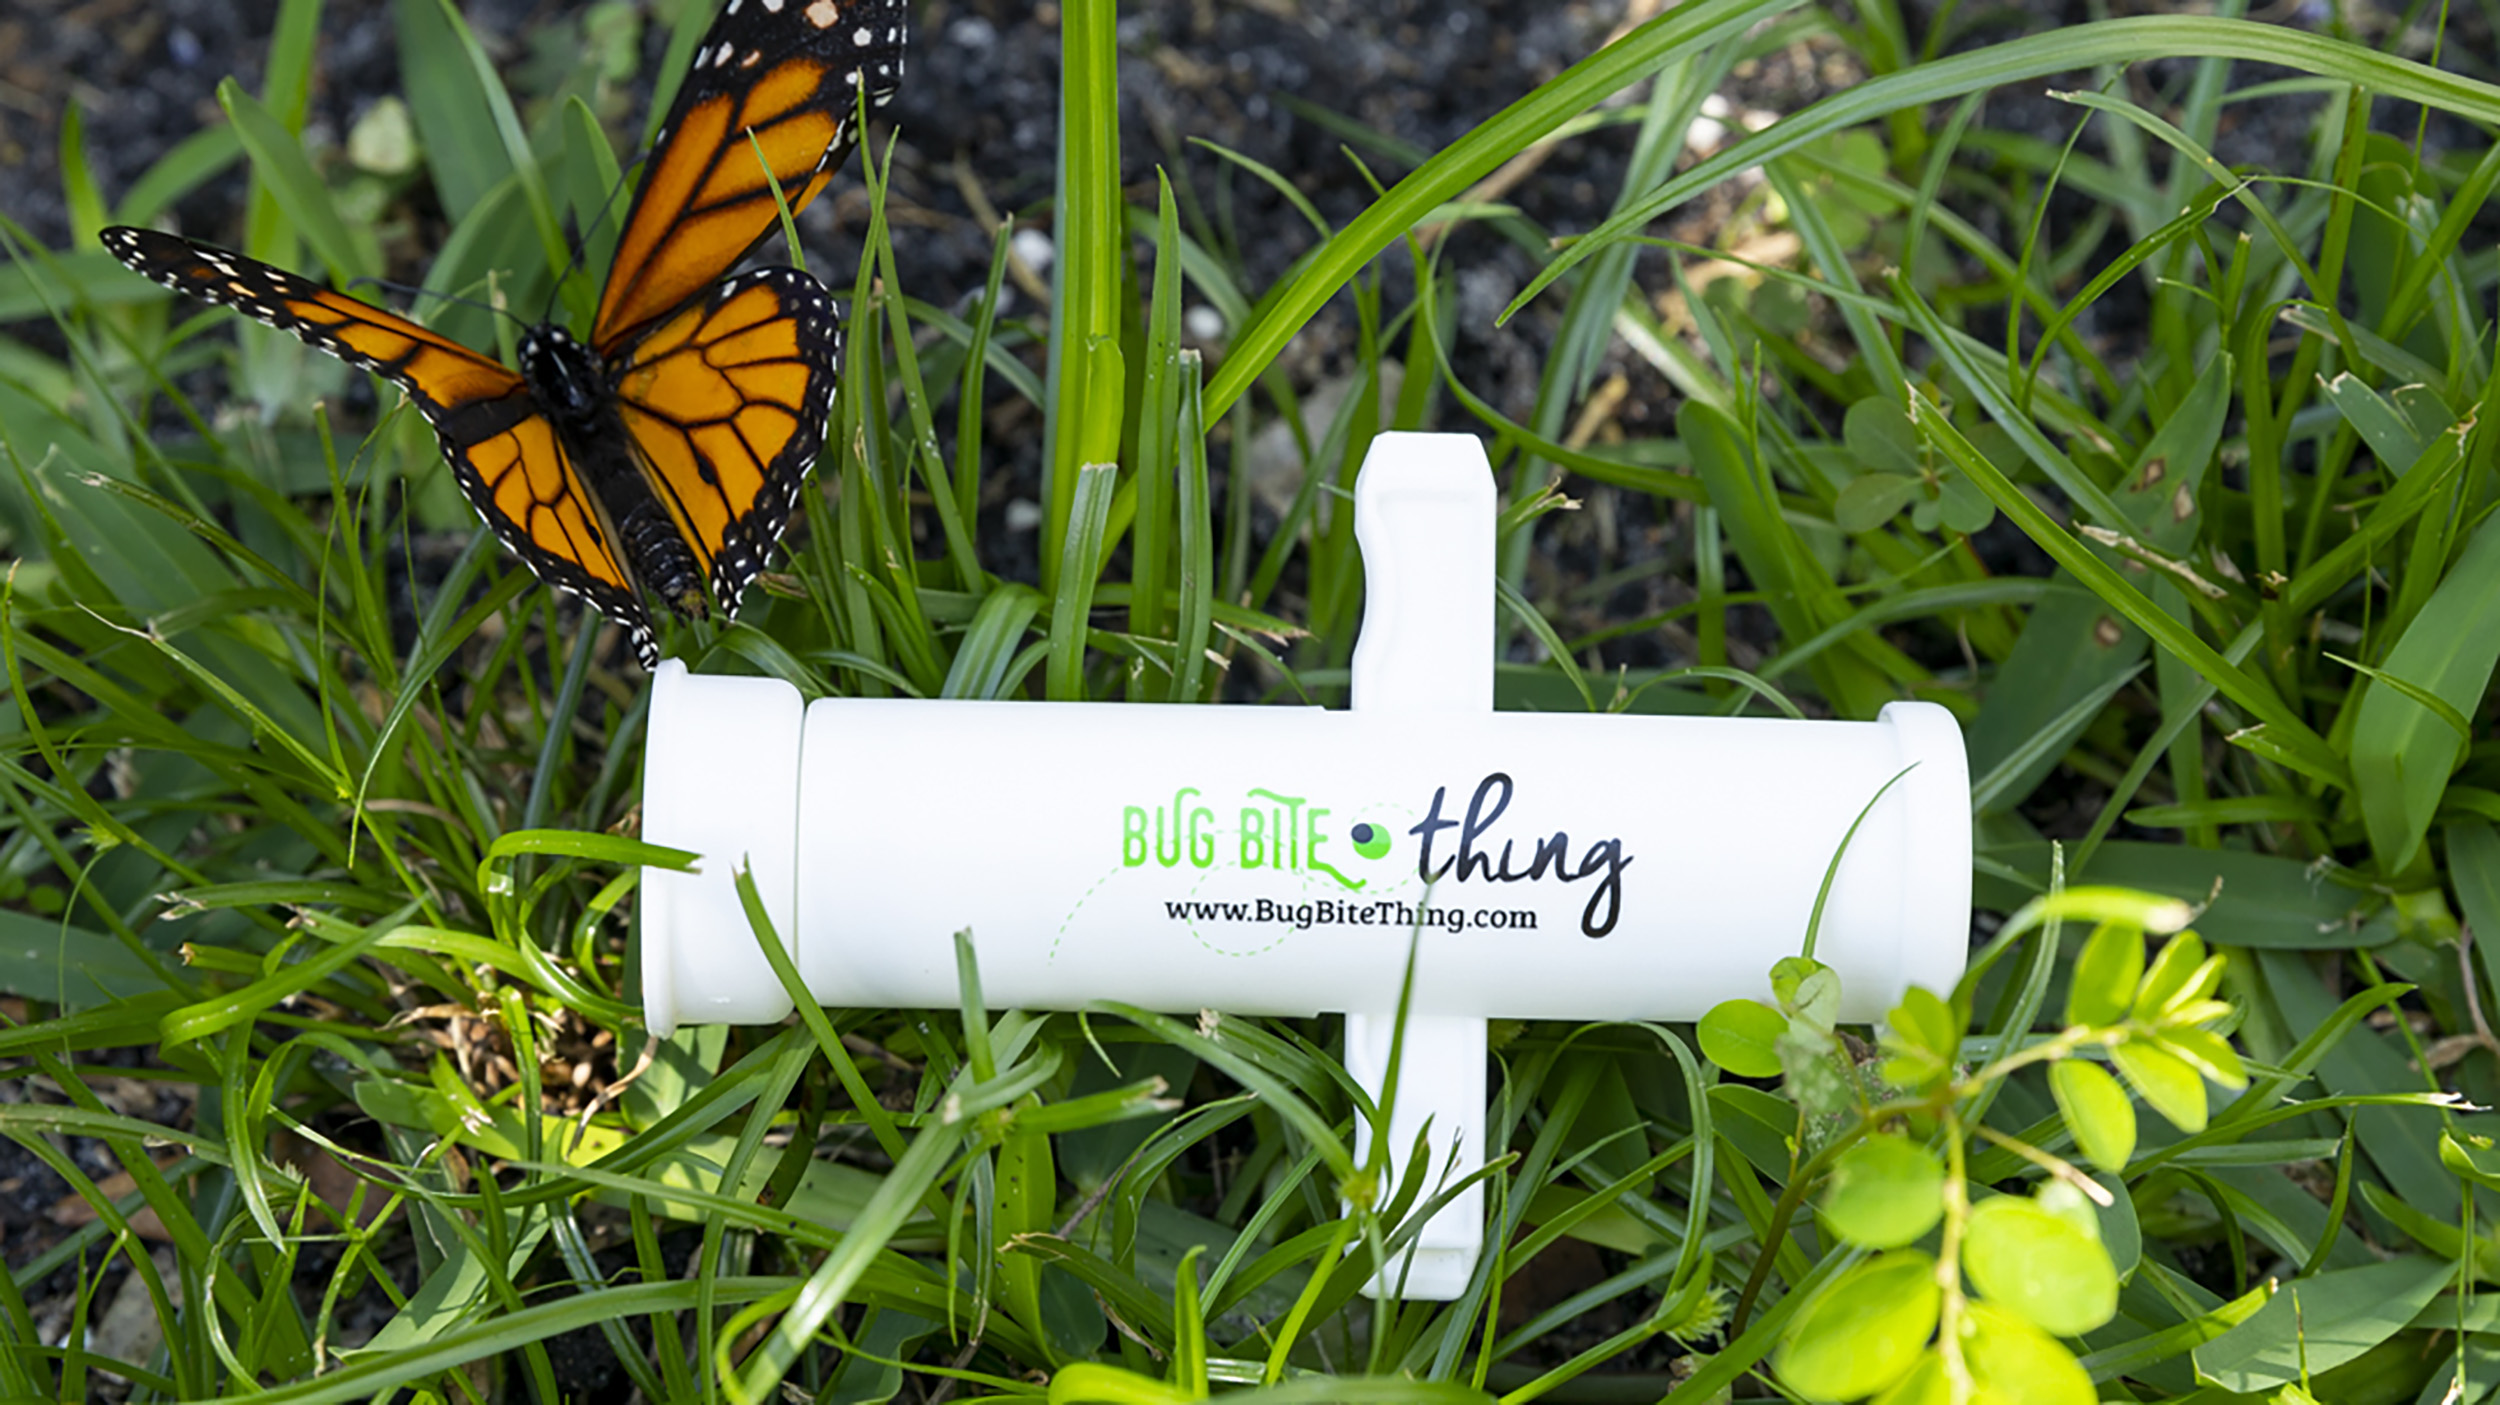 Got a bug bite? Get instant relief with the Bug Bite Thing | CNN Underscored